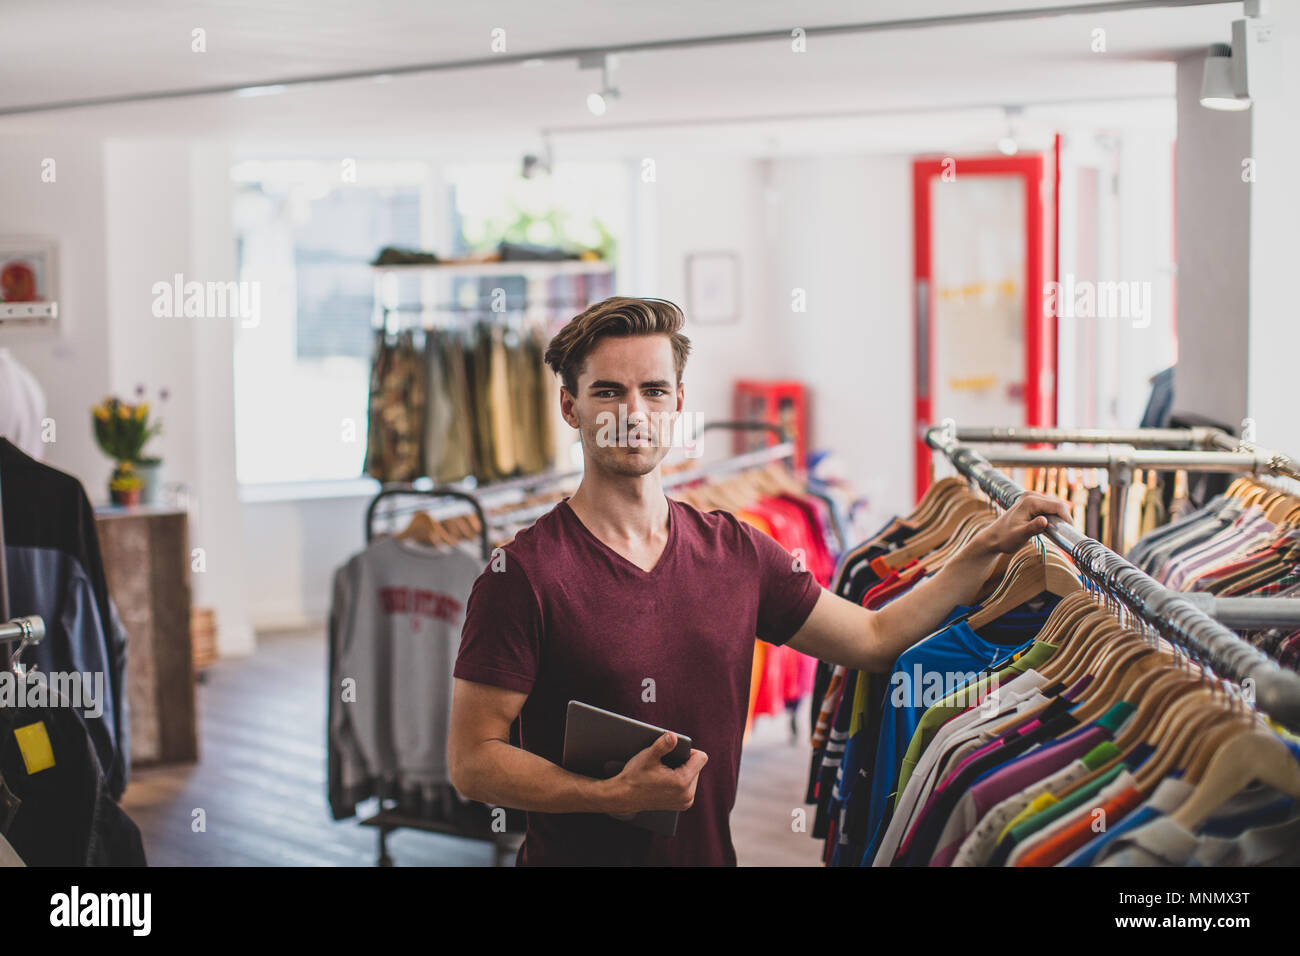 Portrait of a store manager in clothing store Stock Photo